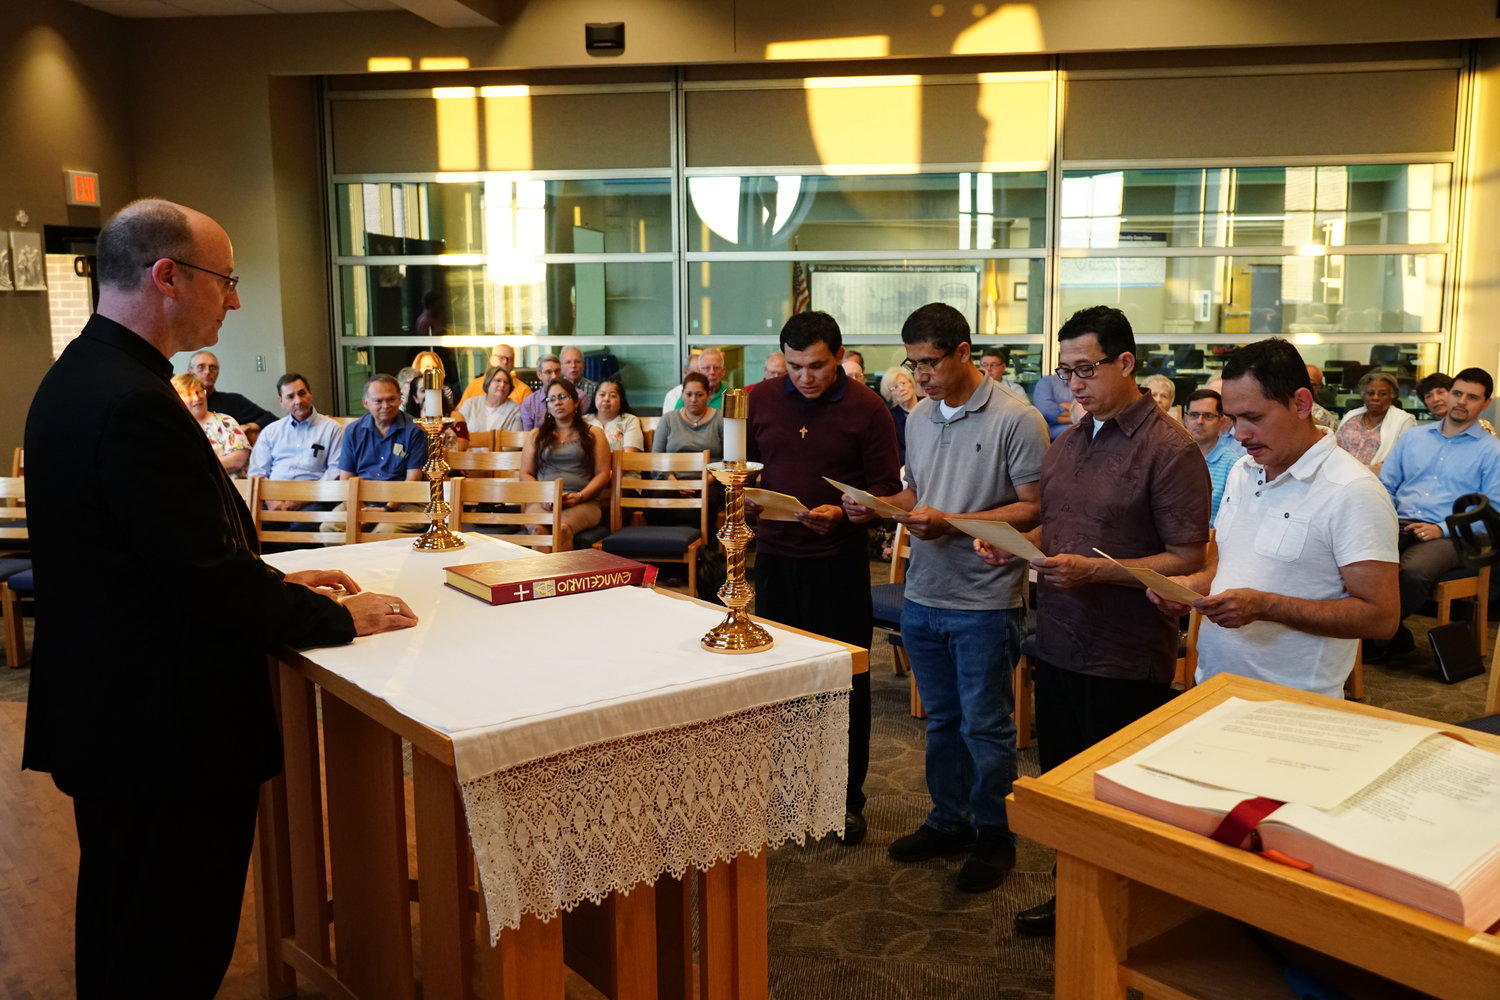 WITH CHRISTIAN OBEDIENCE: Pacheco, who are candidates for the diaconate make their profession of faith and oath of fidelity before Bishop W. Shawn McKnight Aug. 16 in Columbia. They and Enrique Castro (seated, right) hope to be ordained at 2 p.m. on Oct. 13 in the Cathedral of St. Joseph.